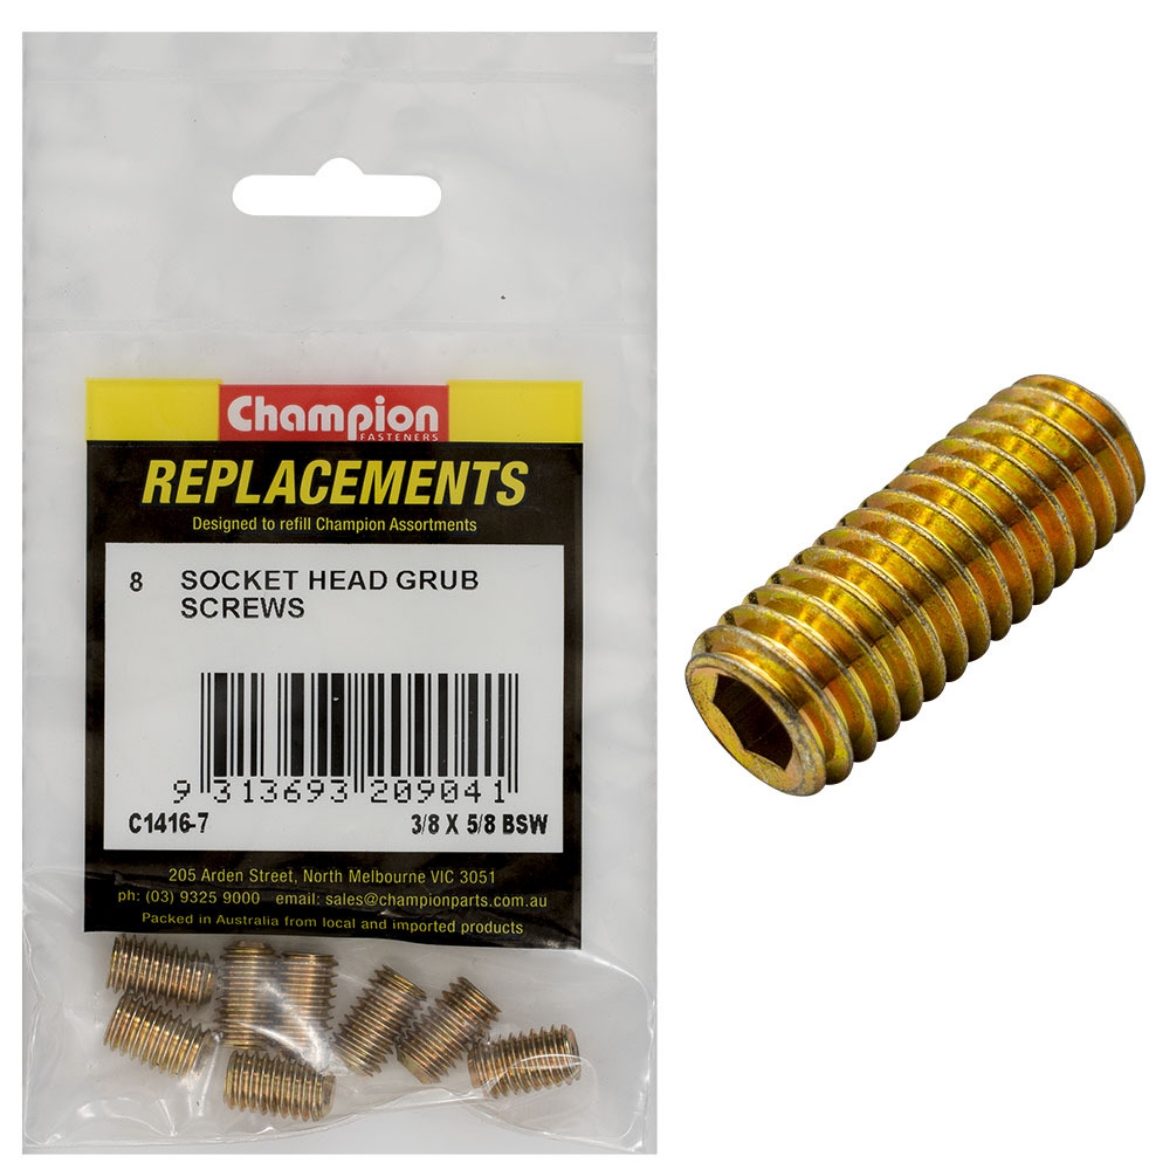 Picture of 3/8 x 5/8 BSW GRUB SCREWS (Pkt.8)